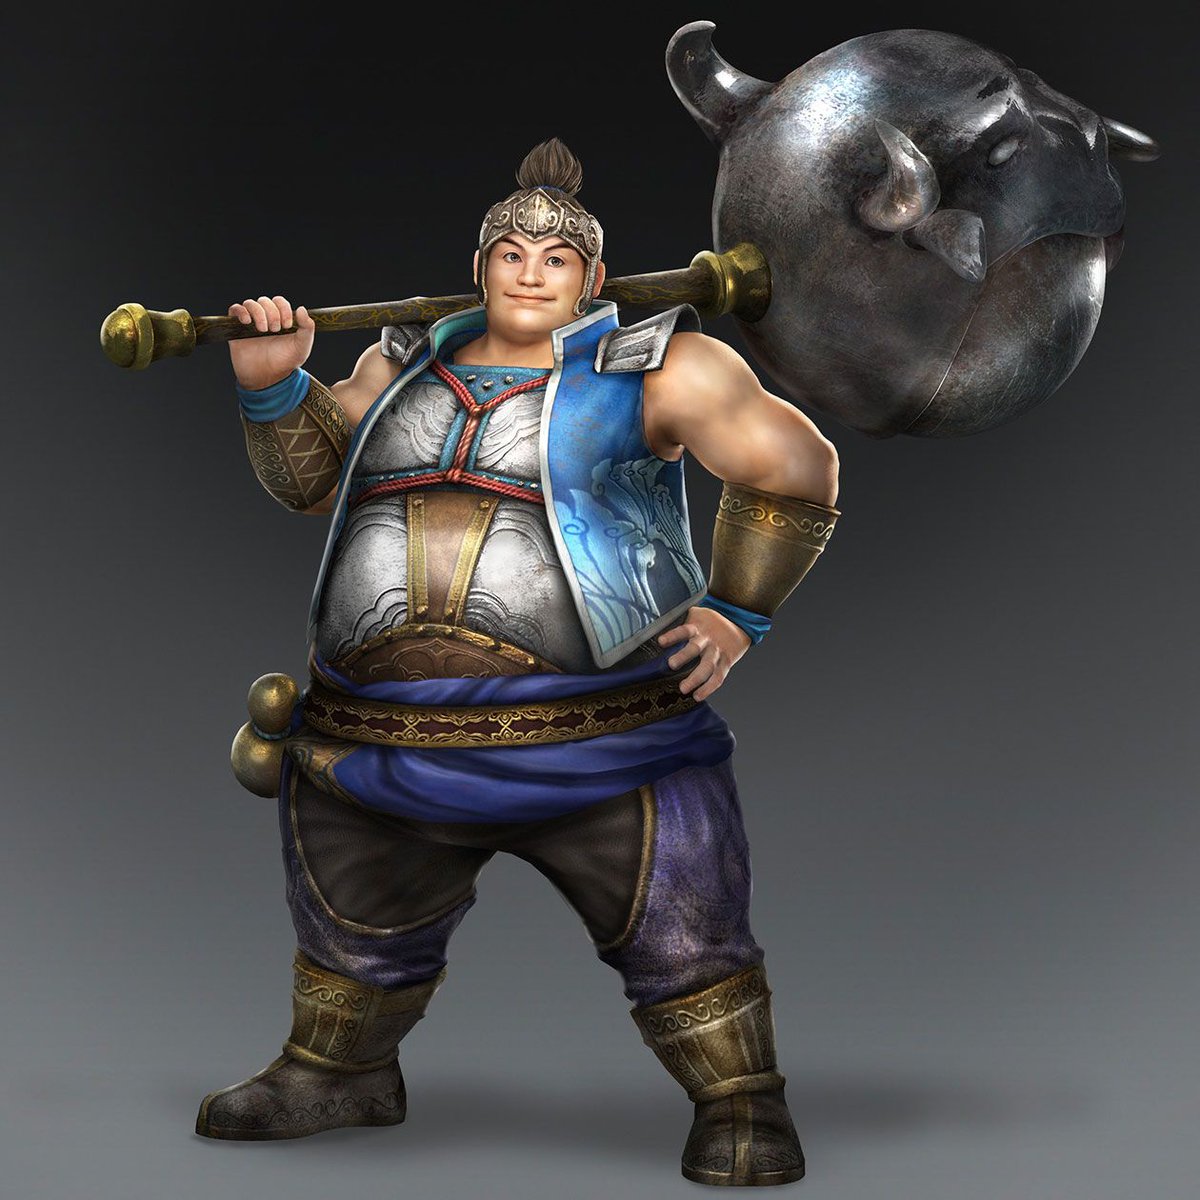 Xu Zhumostly a fat joke but also very good and strong. Besties with Dian Wei which makes for a spectacular dynamic especially considering they're the very serious Cao Cao's bodyguards lol